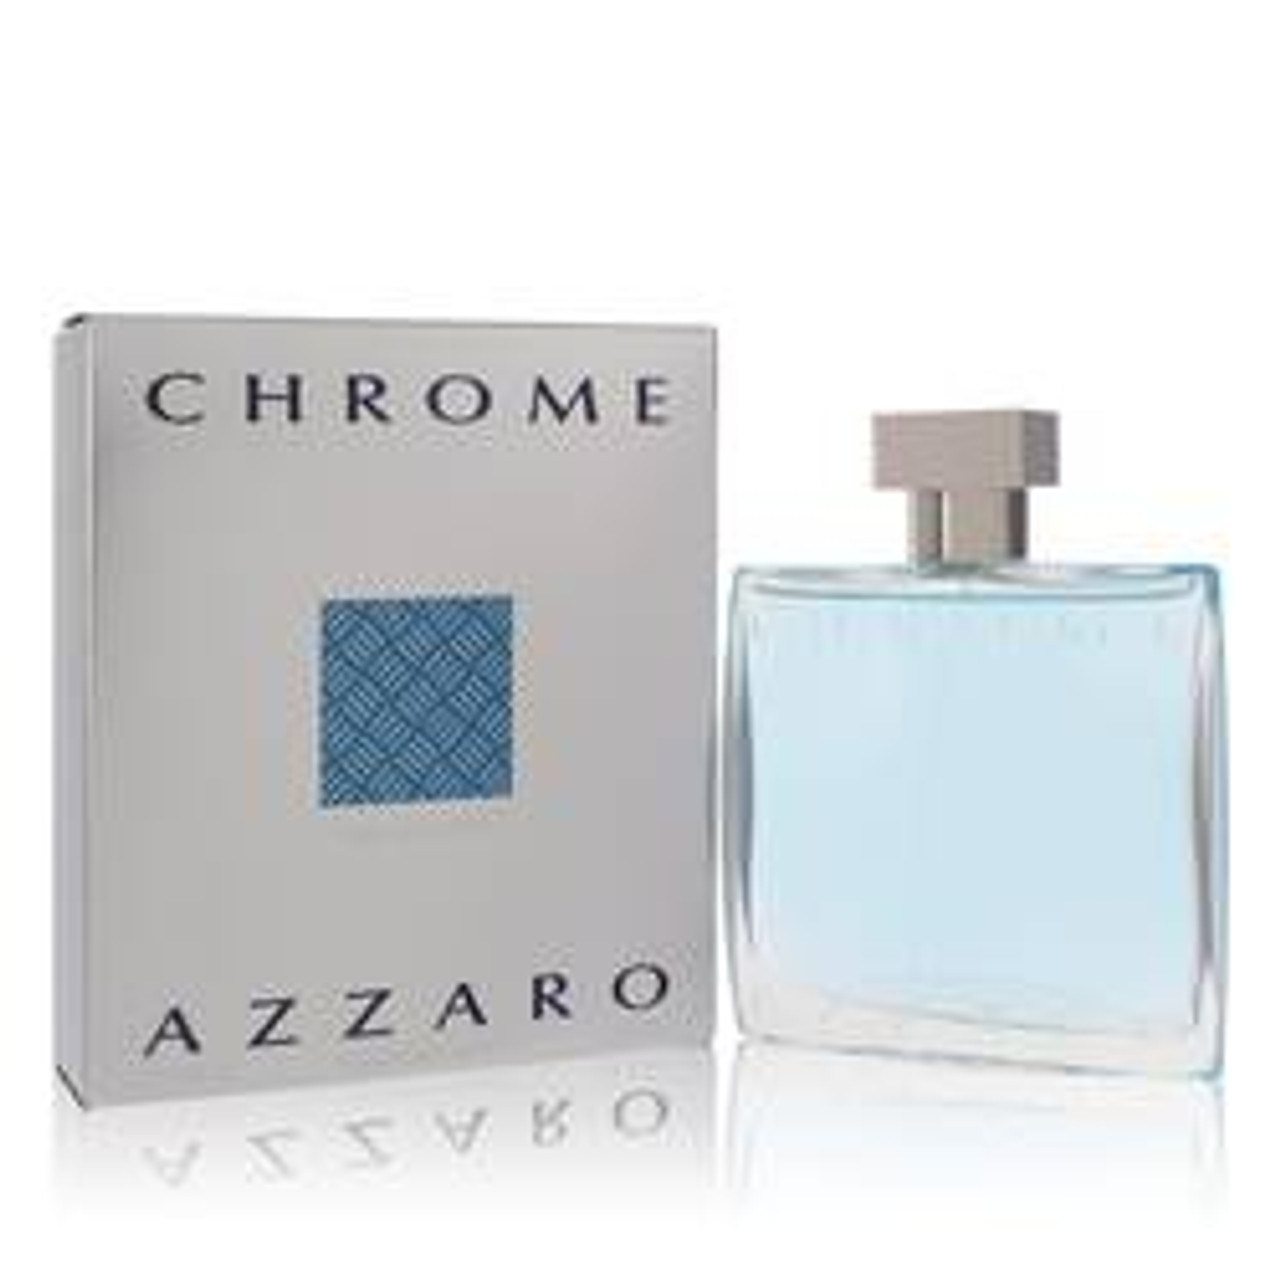 Chrome Cologne By Azzaro Eau De Toilette Spray 3.4 oz for Men - [From 112.00 - Choose pk Qty ] - *Ships from Miami